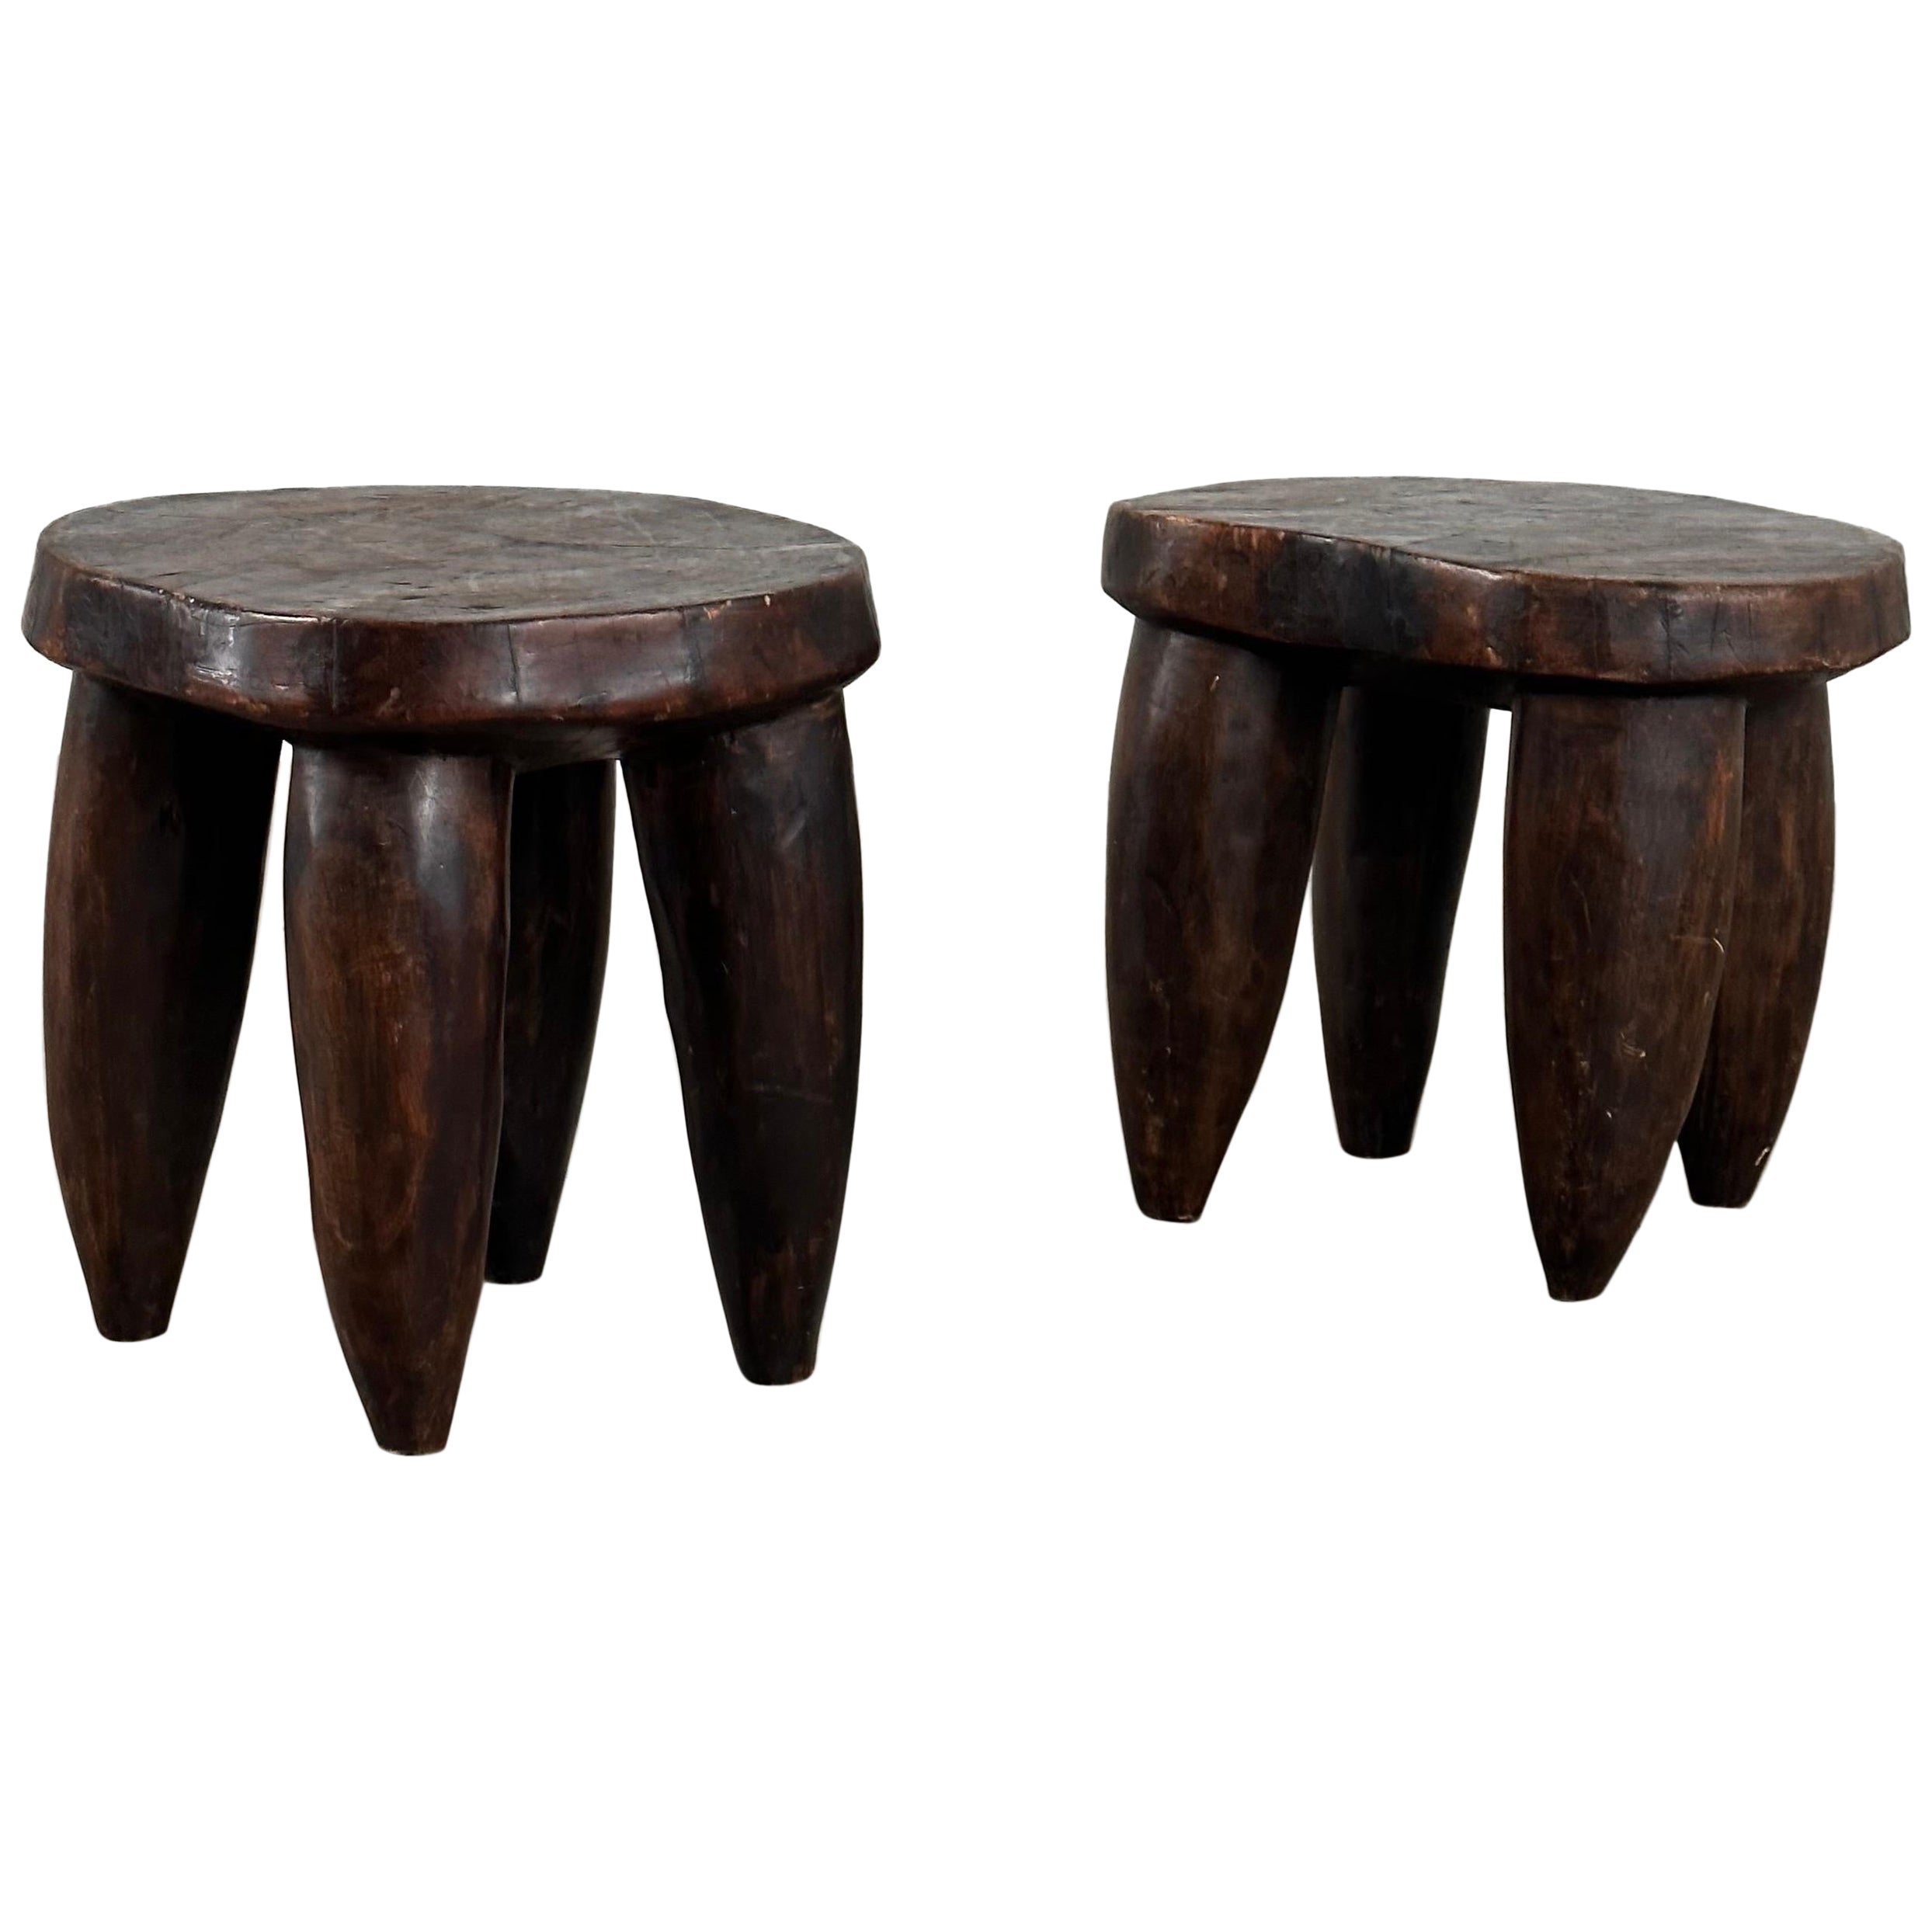 Rare Pair of Large African Senufo Stools, Late 20th Century, Highly Decorative For Sale